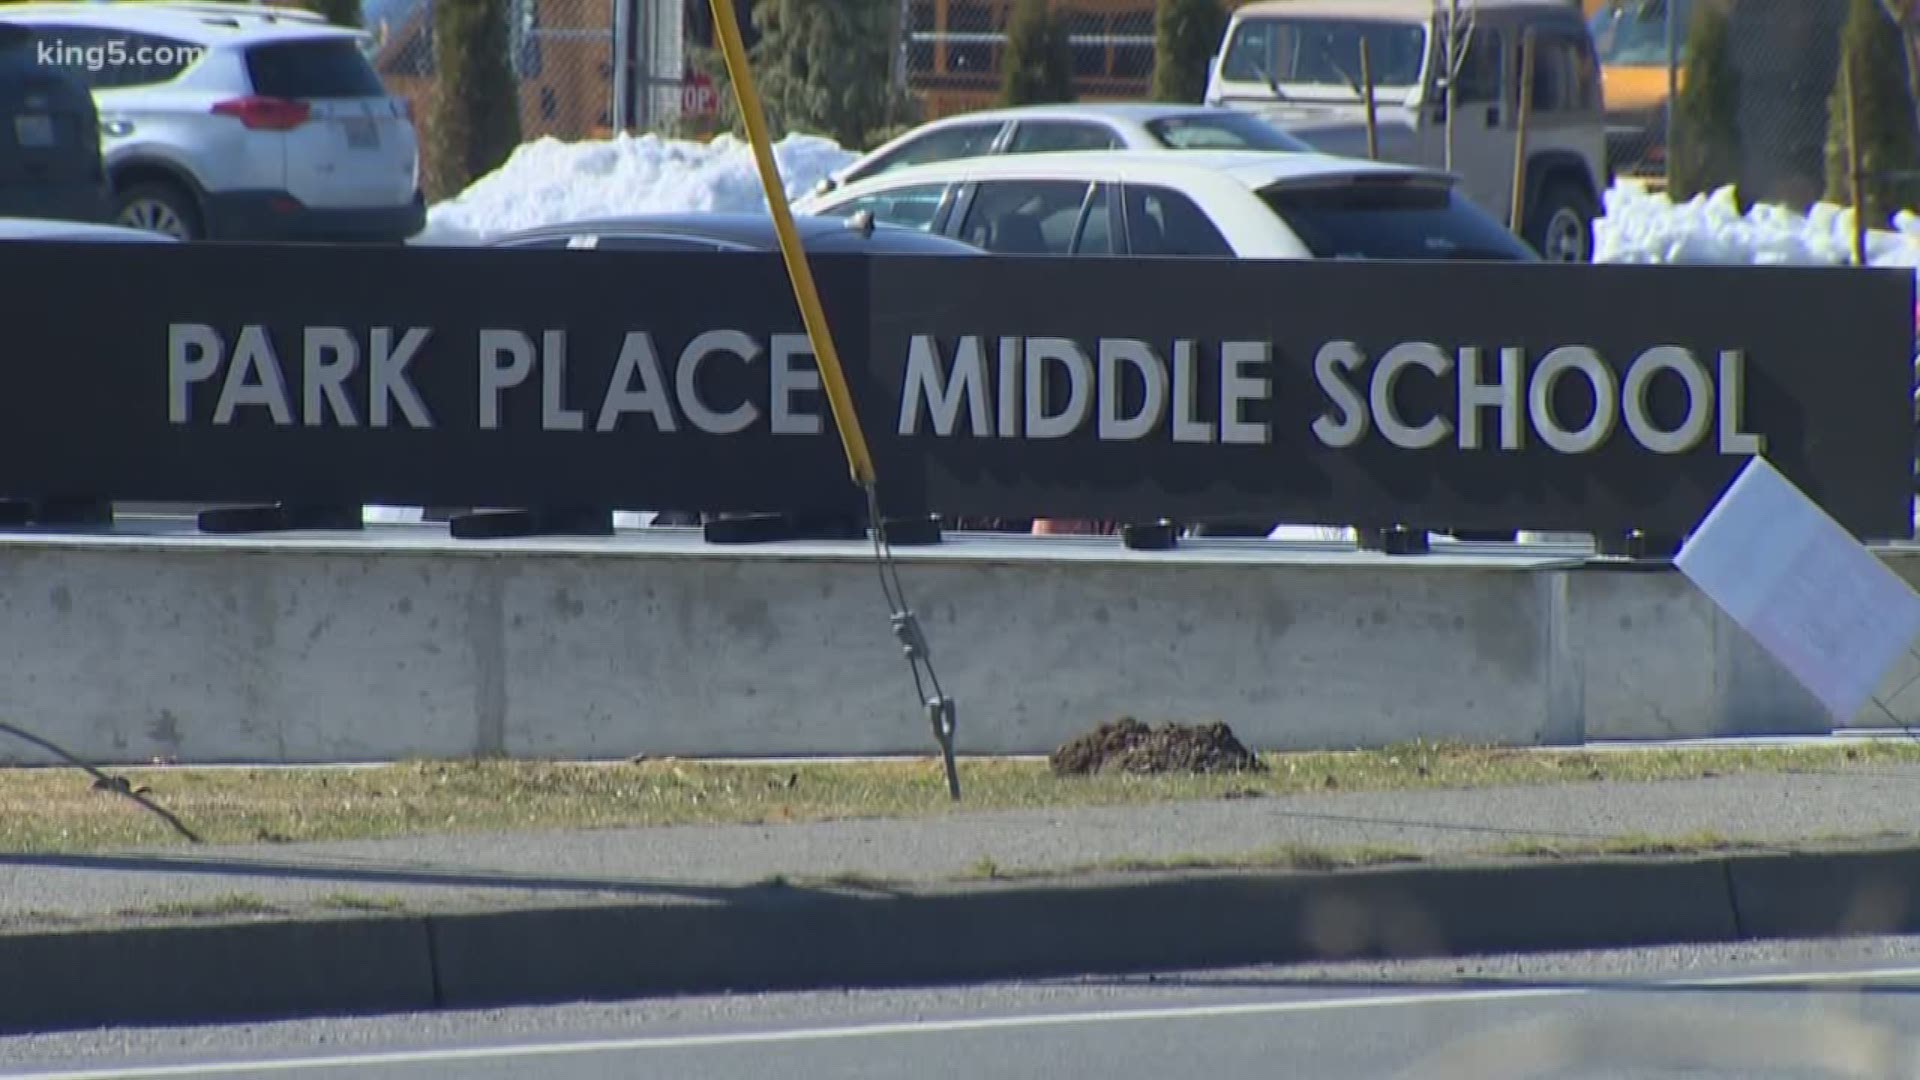 A substitute teacher is under fire for allegedly shoving a 13-year-old Snohomish County student in class. It has been more than a month since the incident was reported and the child's parents are still waiting for answers. KING 5's Eric Wilkinson reports.